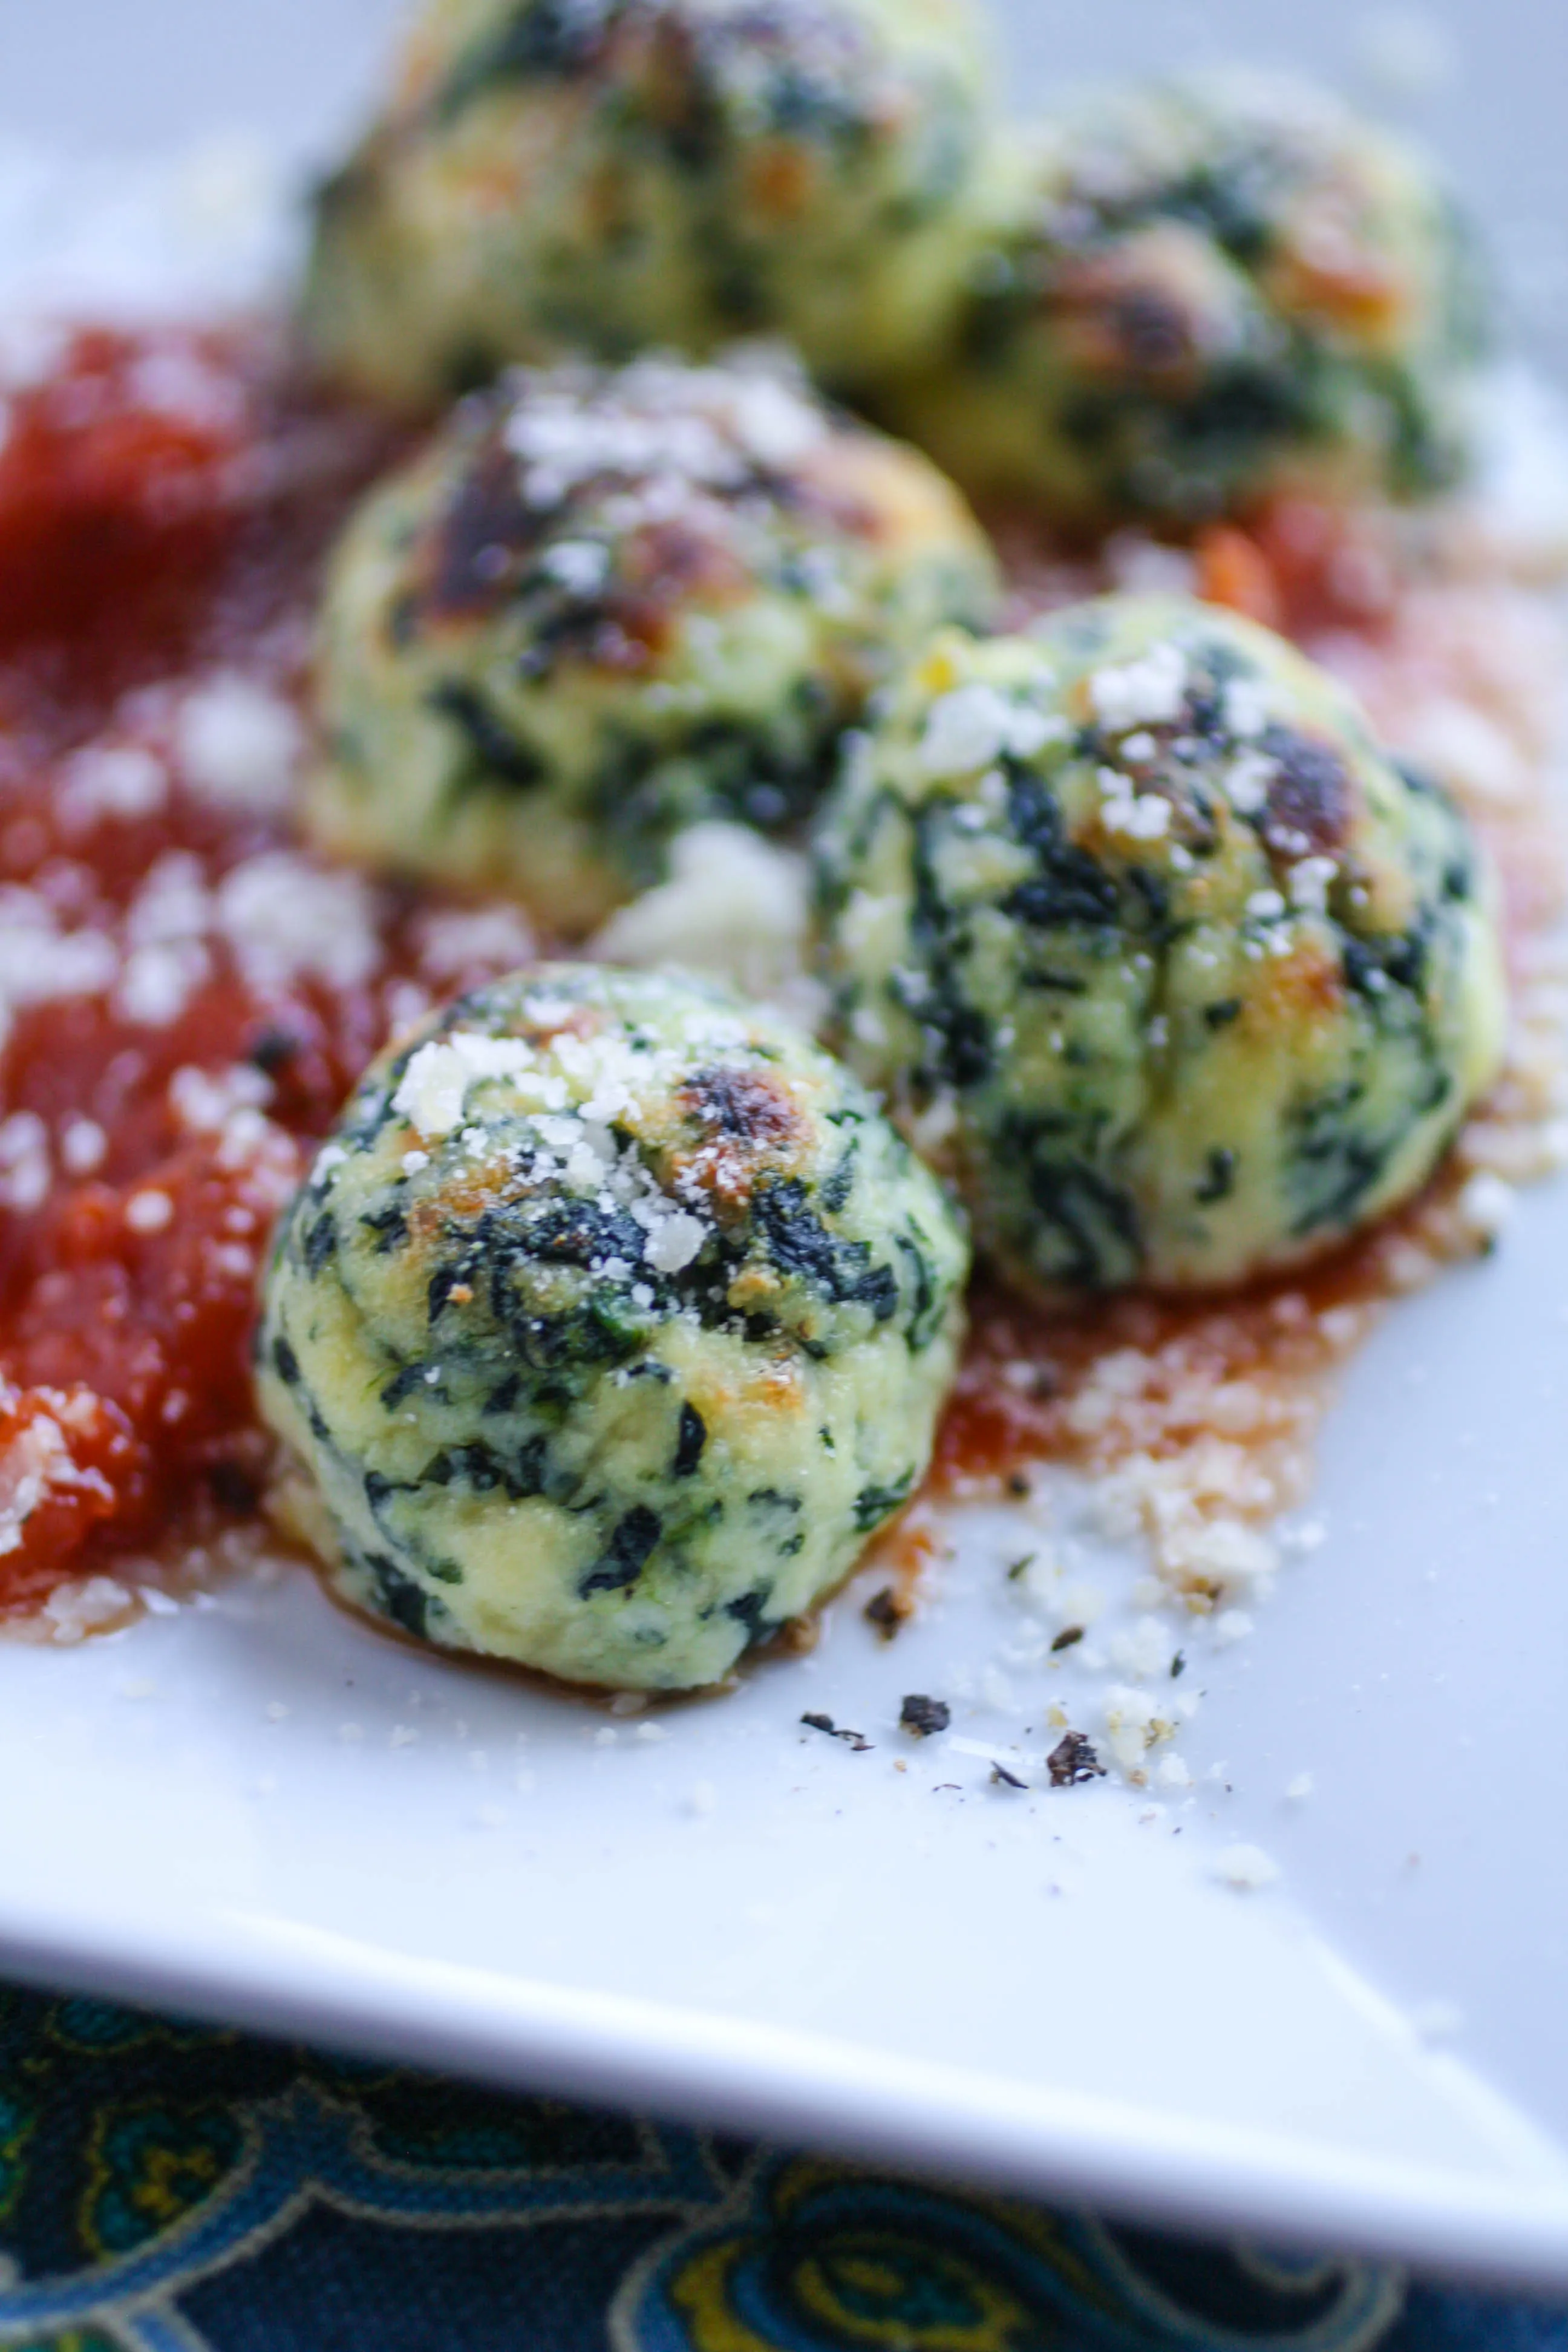 Simple Spinach and Ricotta Gnocchi are a real Italian treat! This dish is easy to make and perfect as an appetizer or main dish.